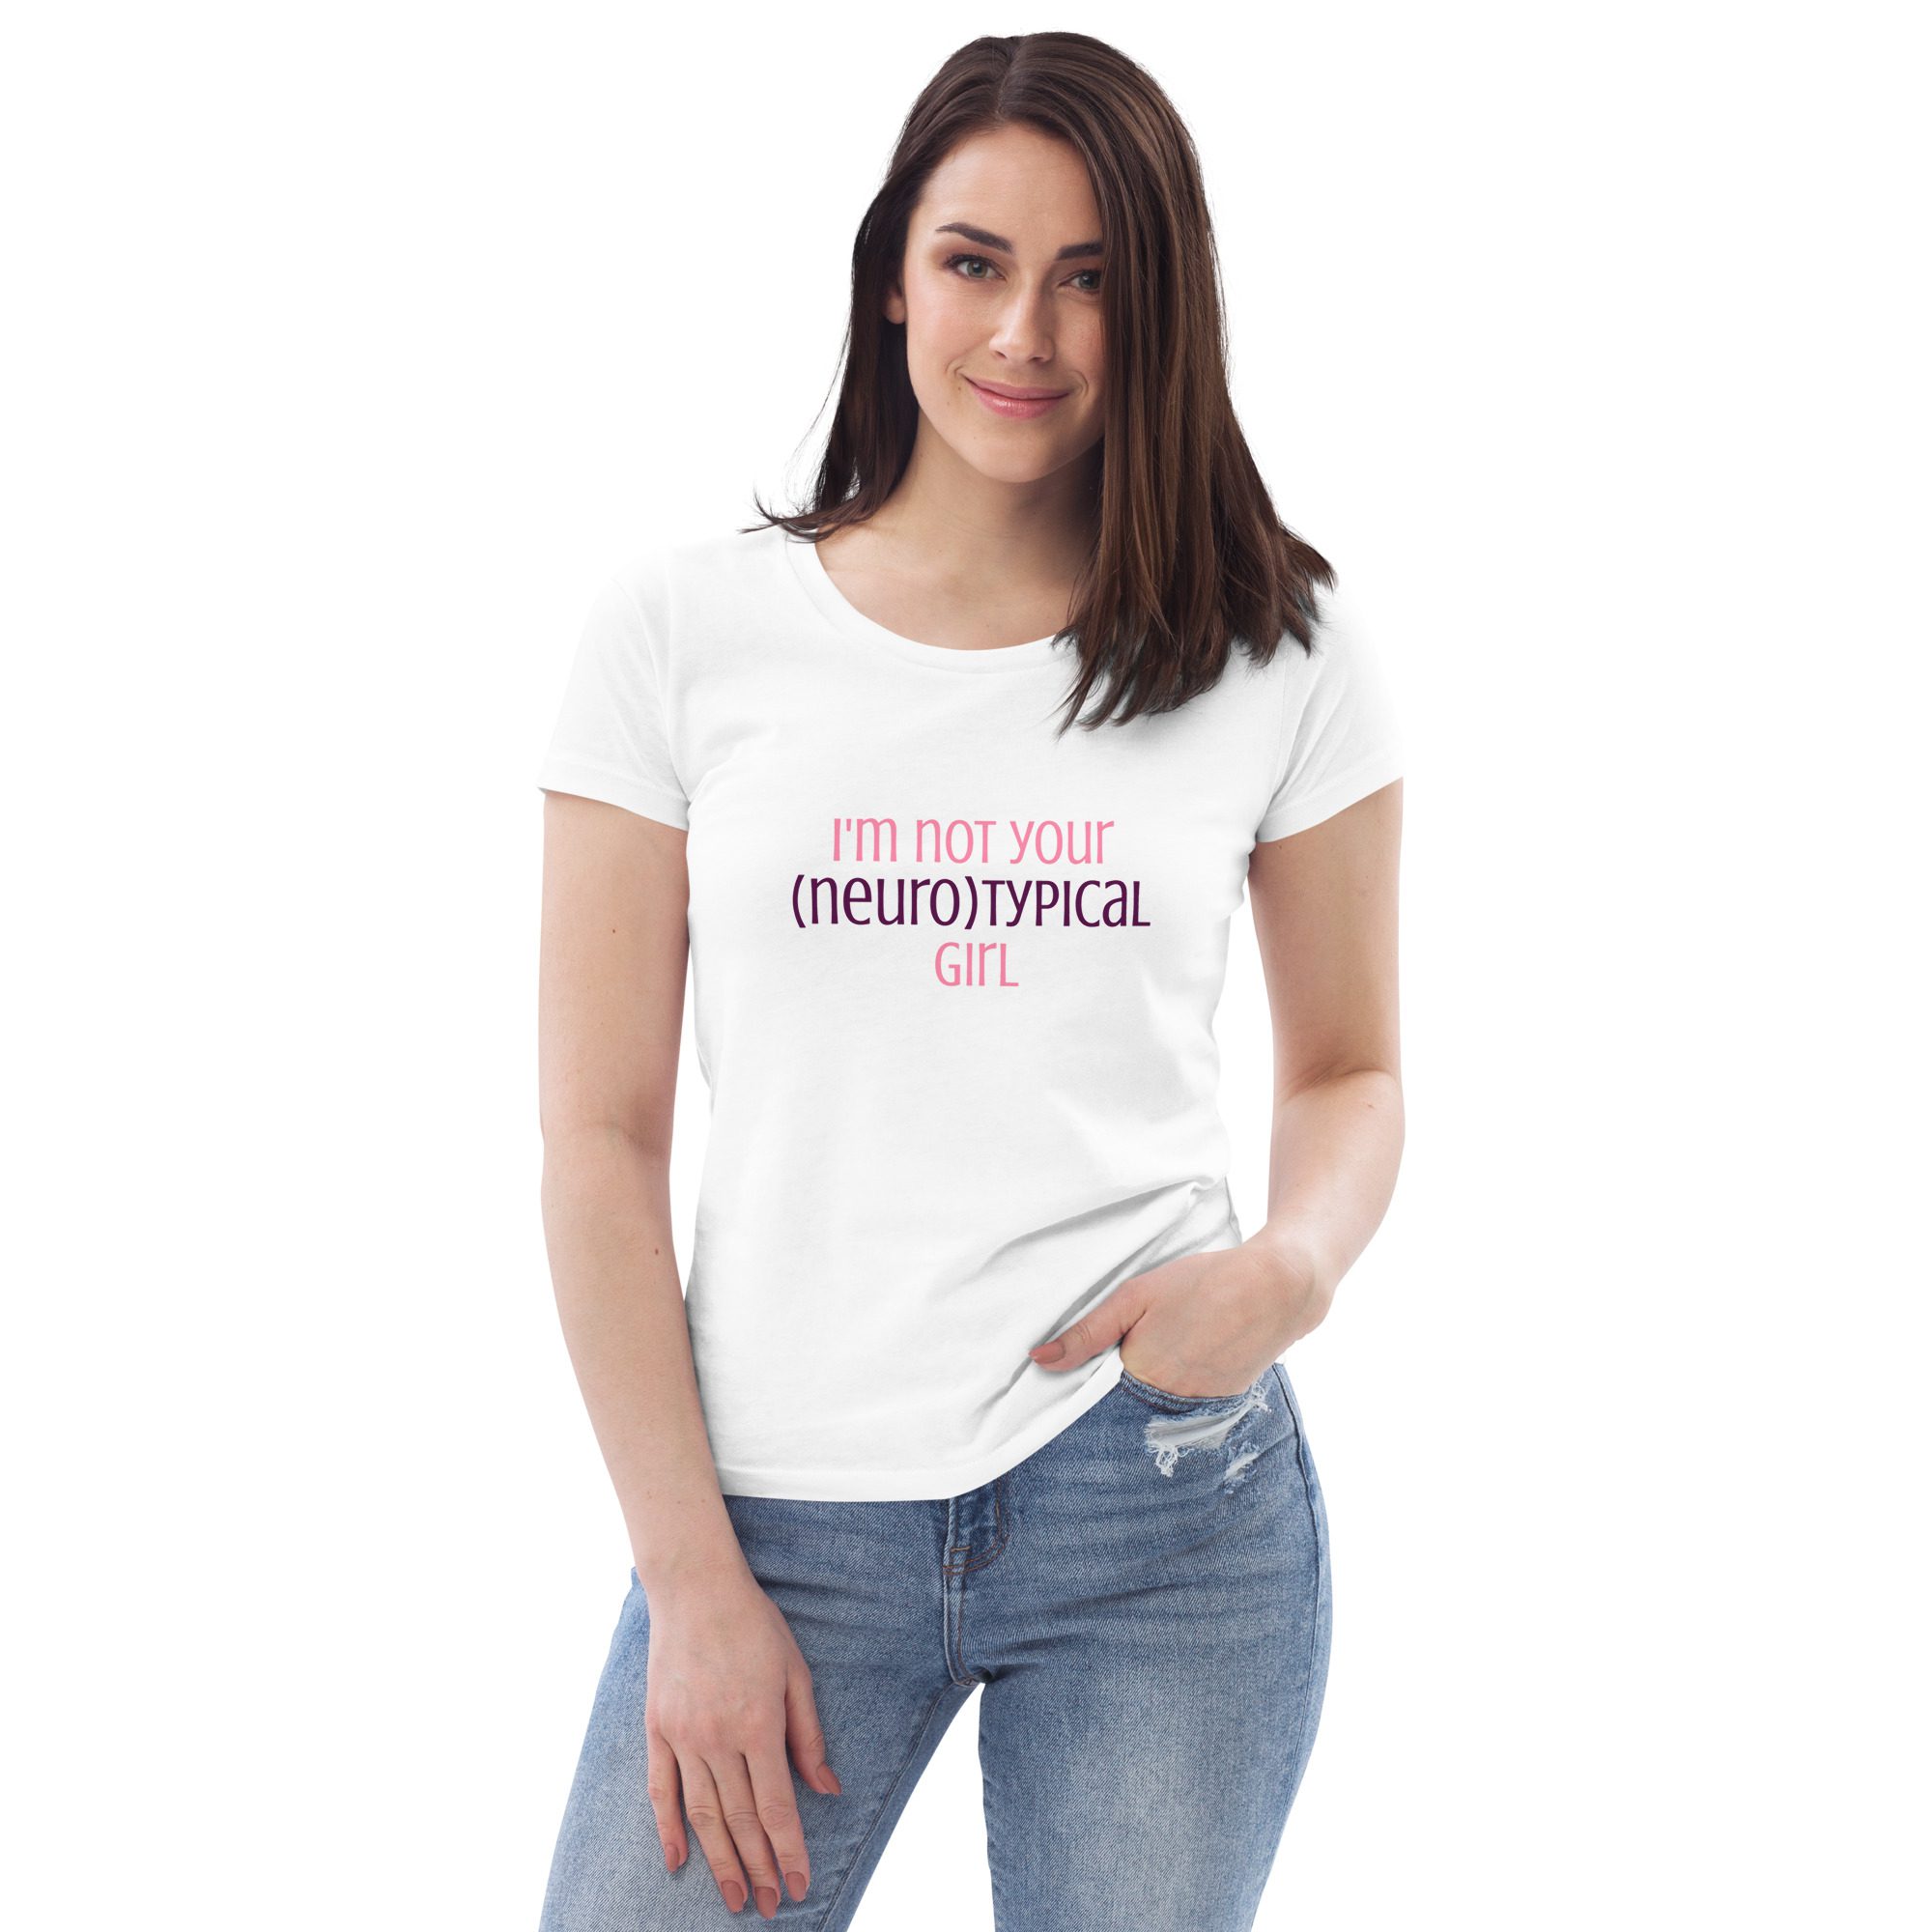 I’m Not Your Neurotypical Girl Fitted Organic T-shirt